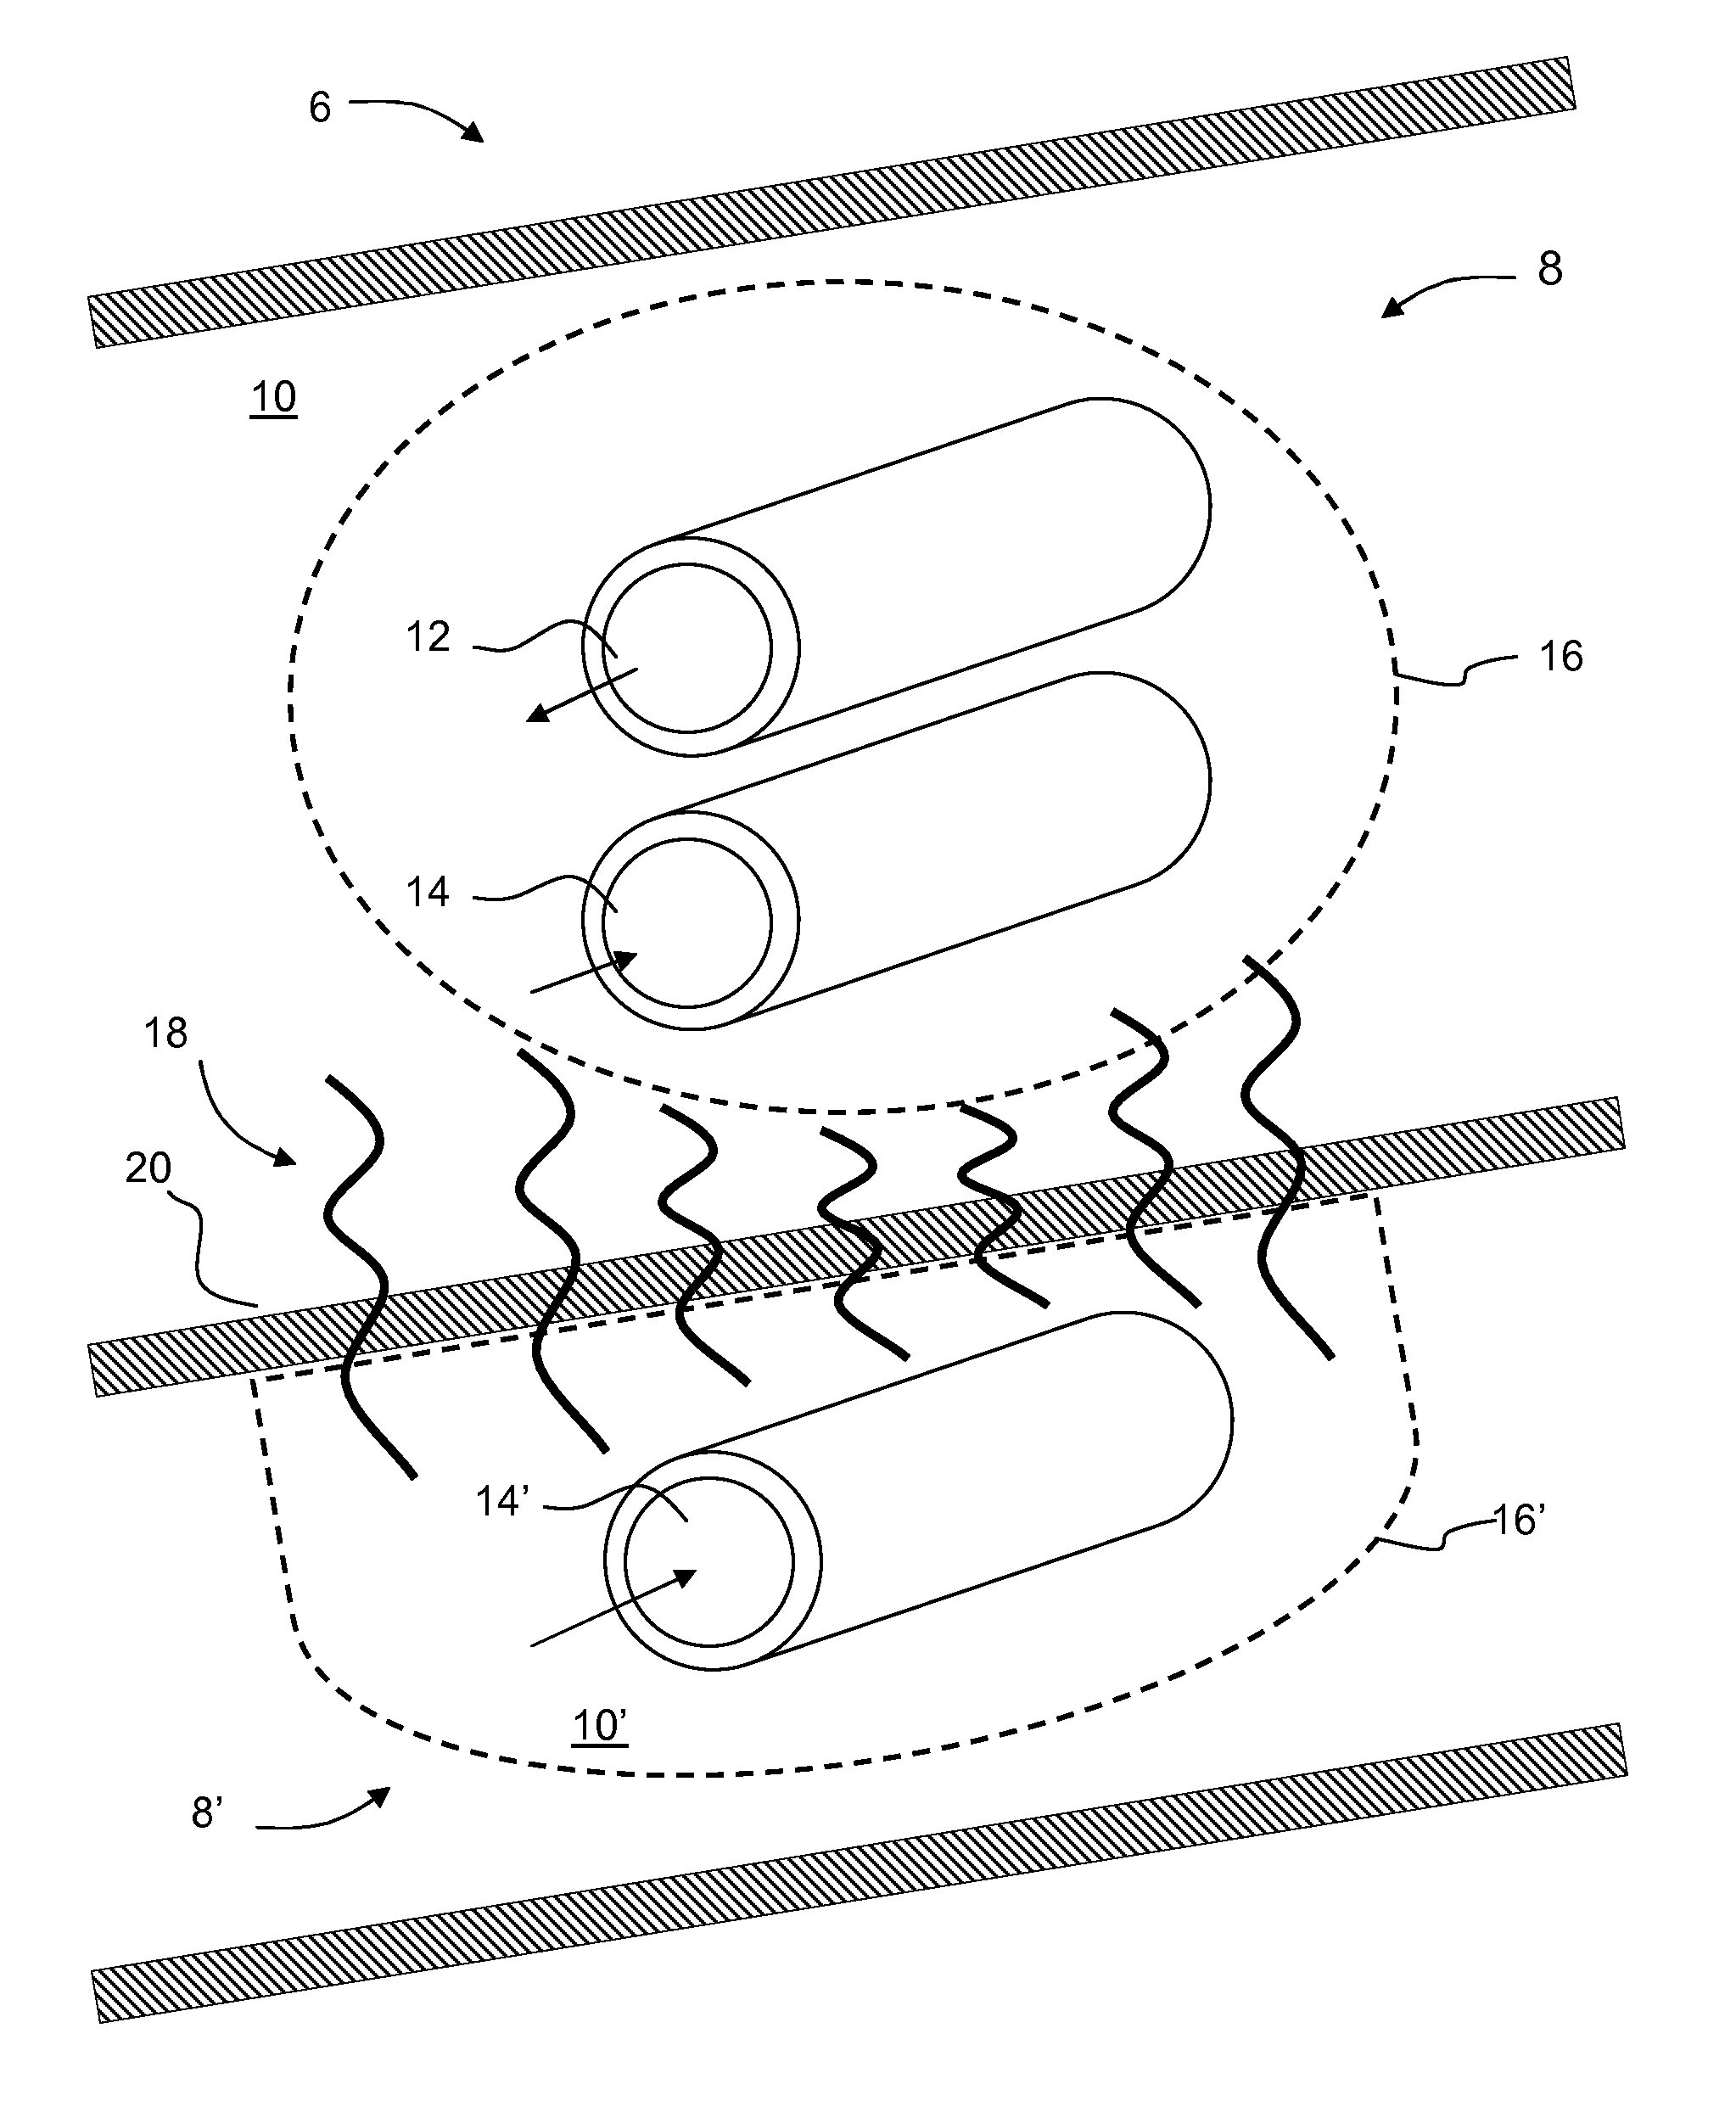 Passive heating assisted recovery methods